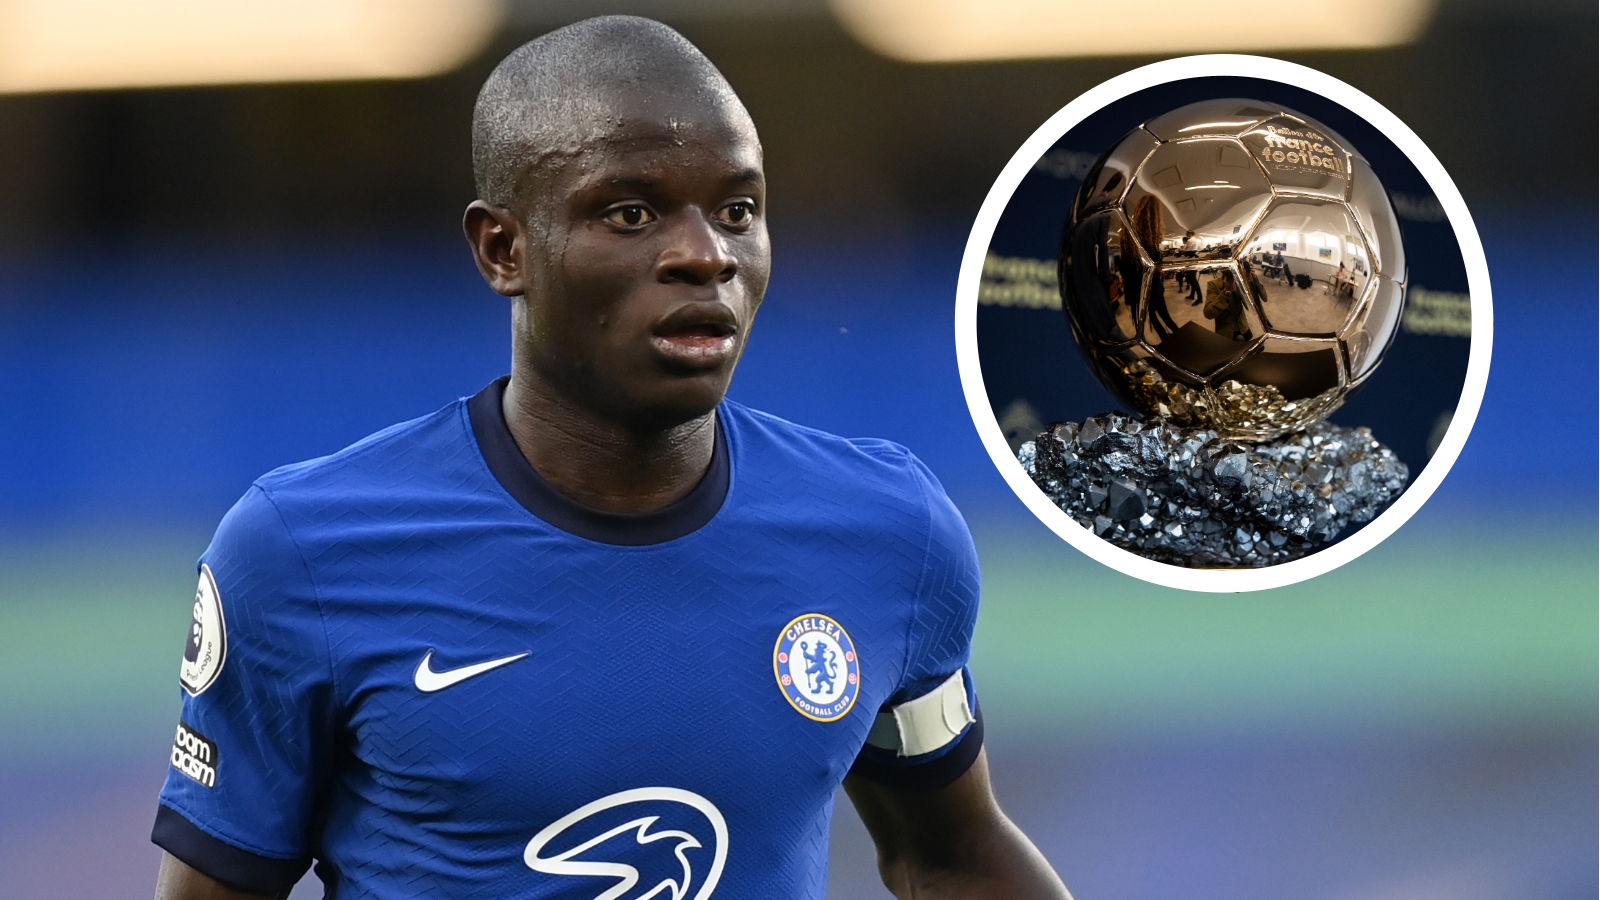 He S An Extraordinary Player Kante Backed For Ballon D Or By Former Chelsea Star Ramires Goal Com